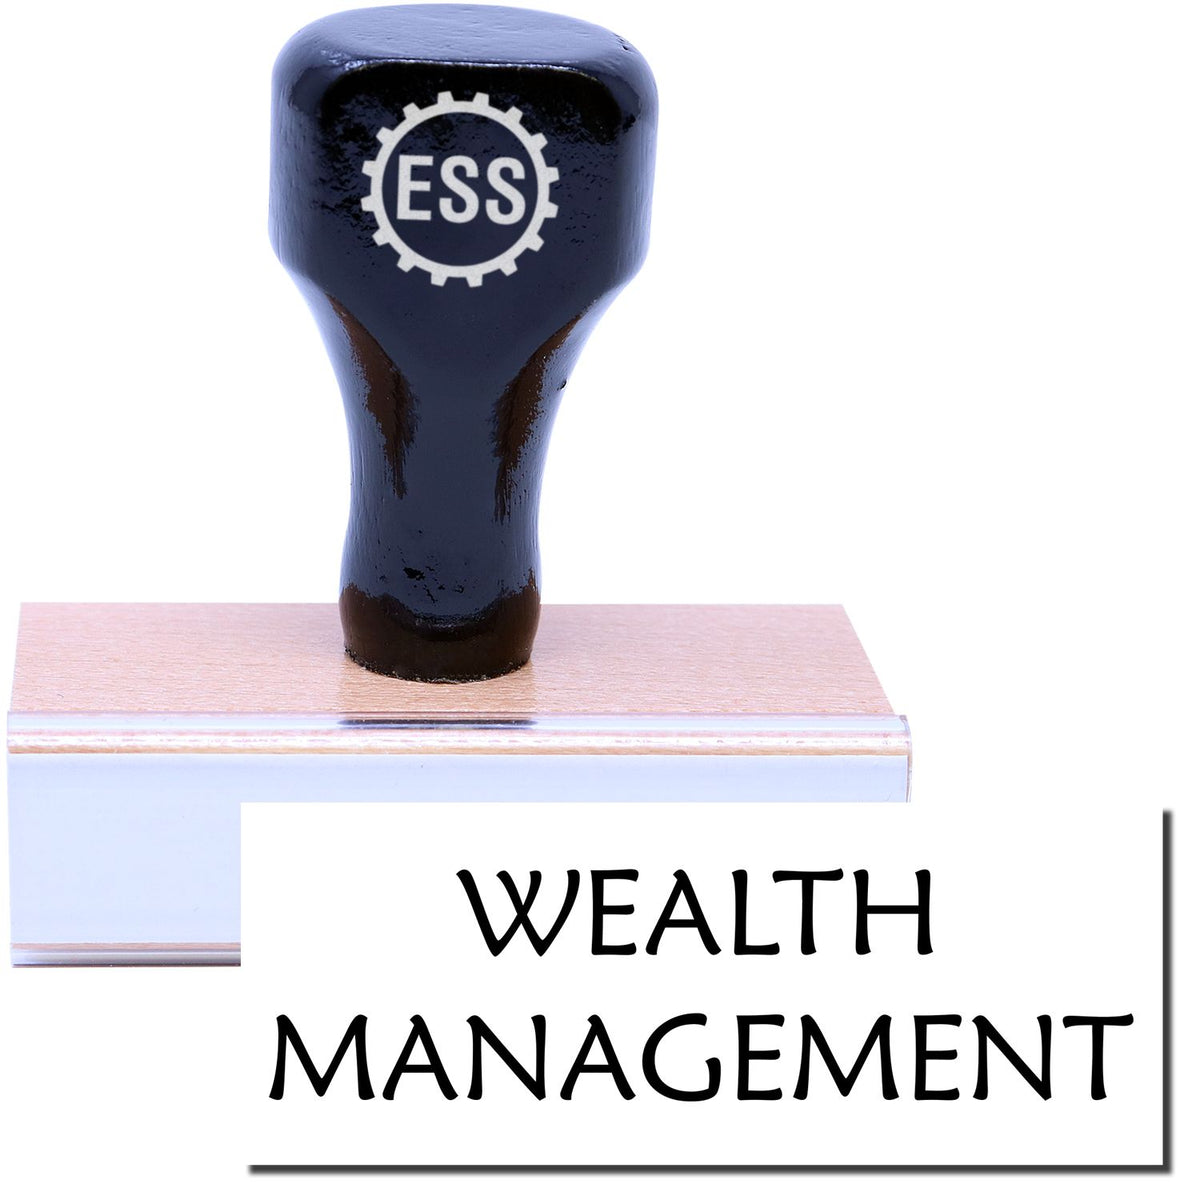 A stock office rubber stamp with a stamped image showing how the text &quot;WEALTH MANAGEMENT&quot; is displayed after stamping.